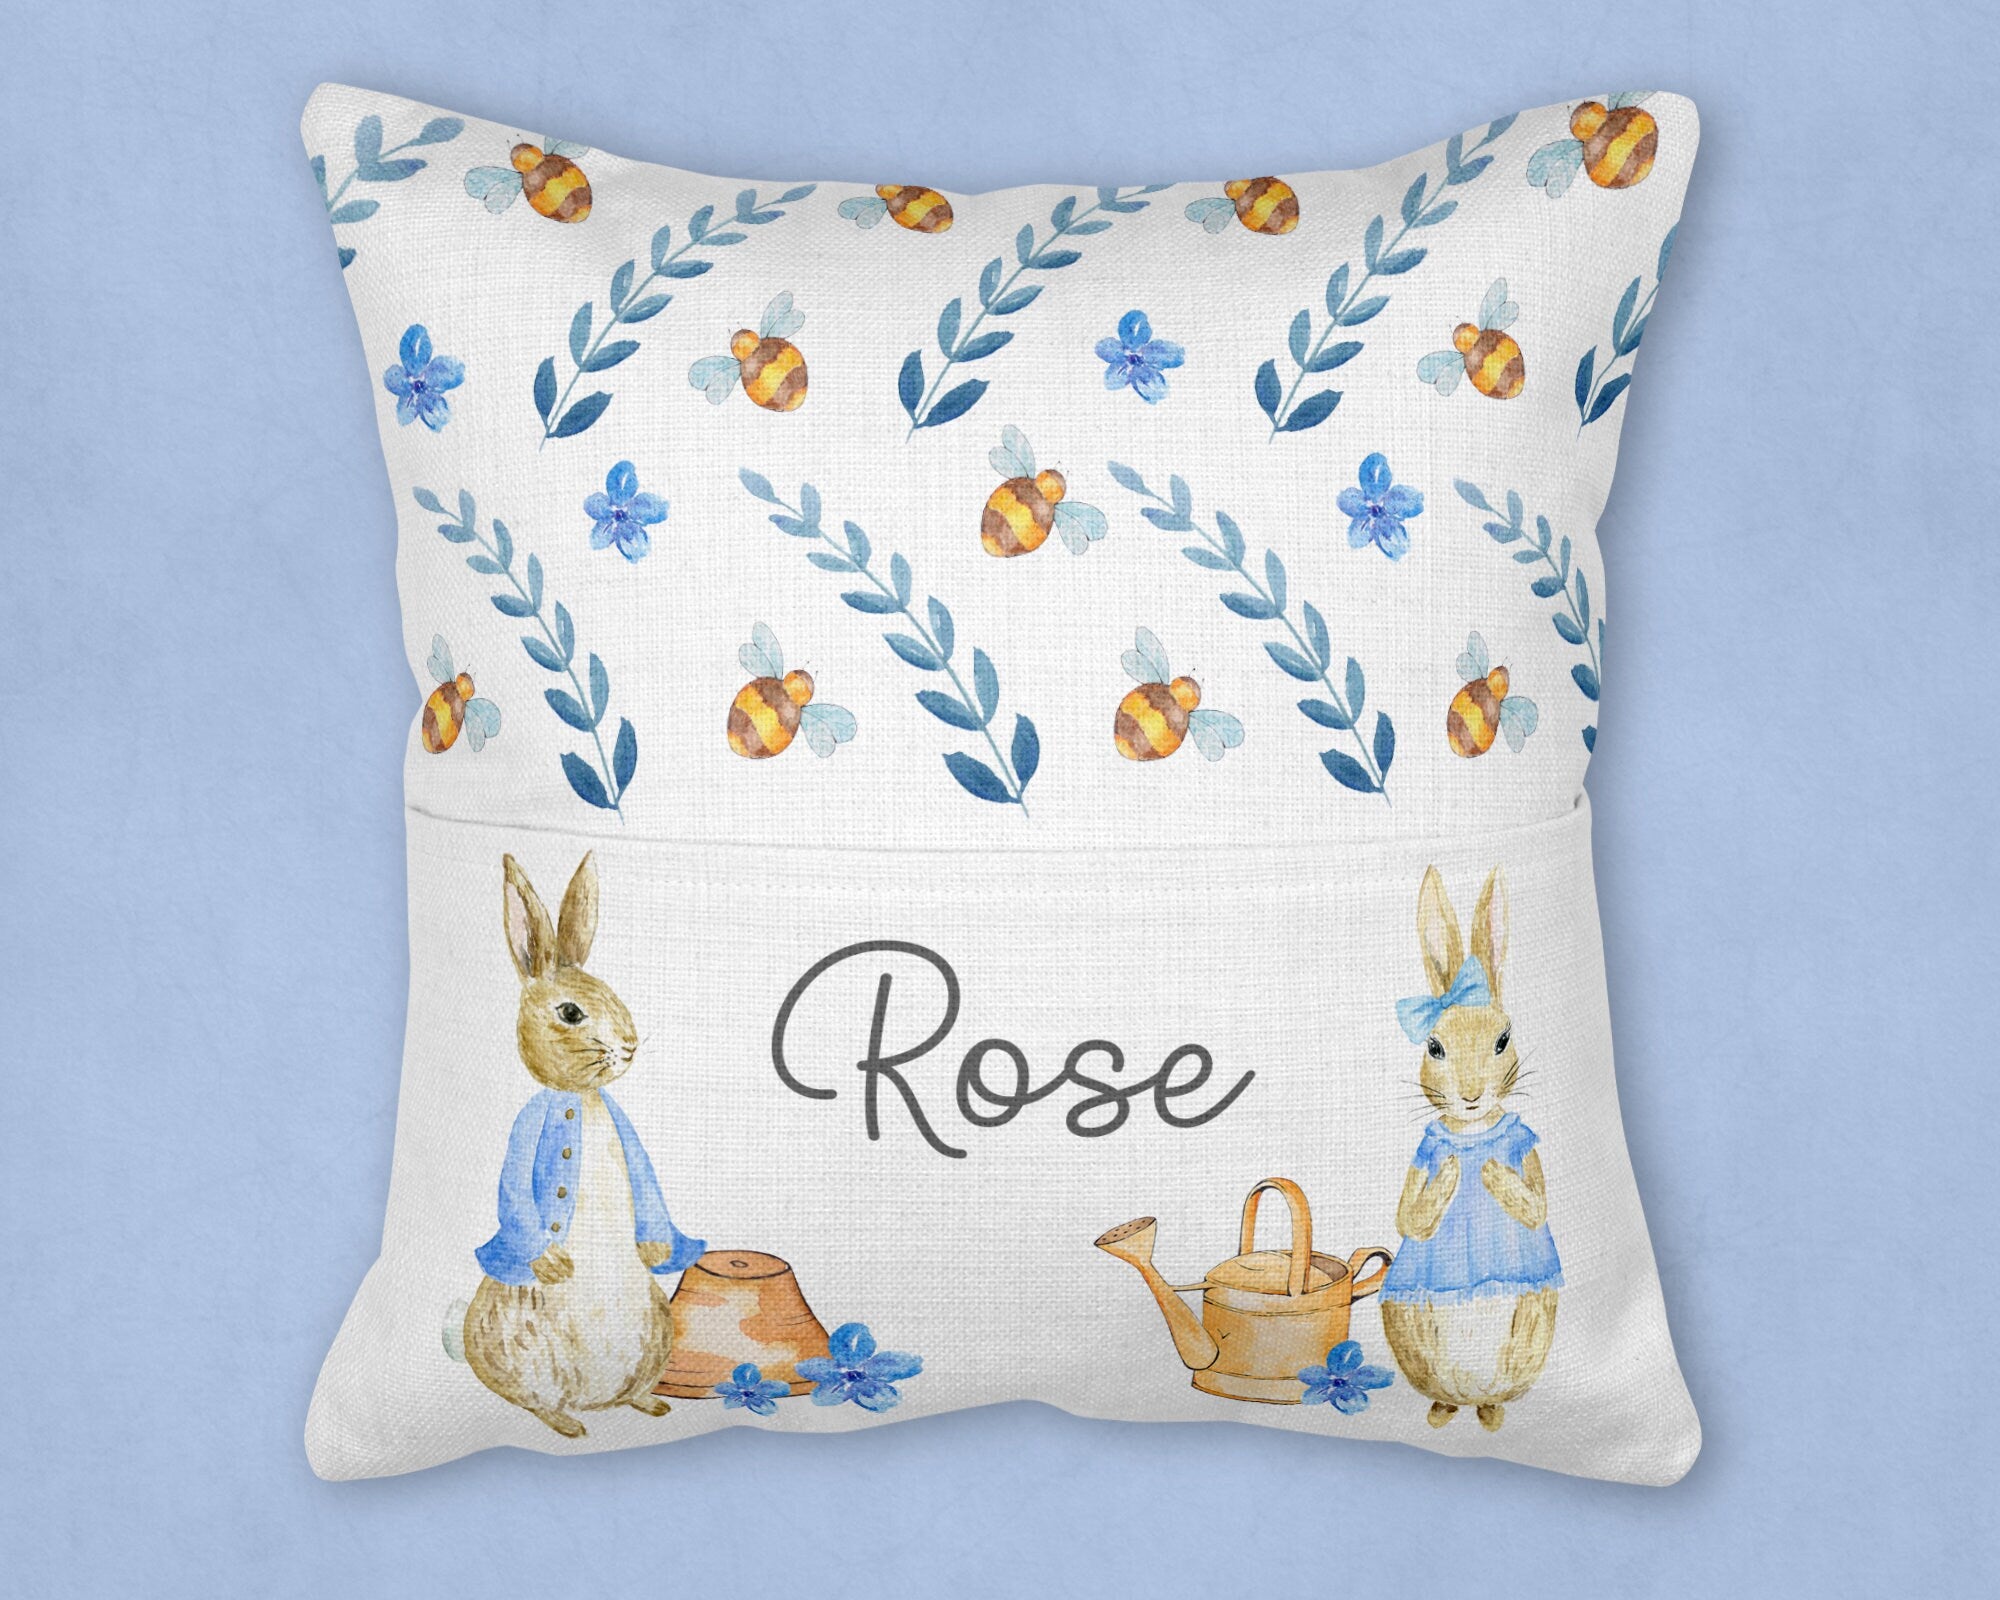 Peter Rabbit Reading cushion, Reading cushion, Personalised New Baby Cushion, New Baby Gifts, Rabbit Cushion, Peter rabbit nursery, reading